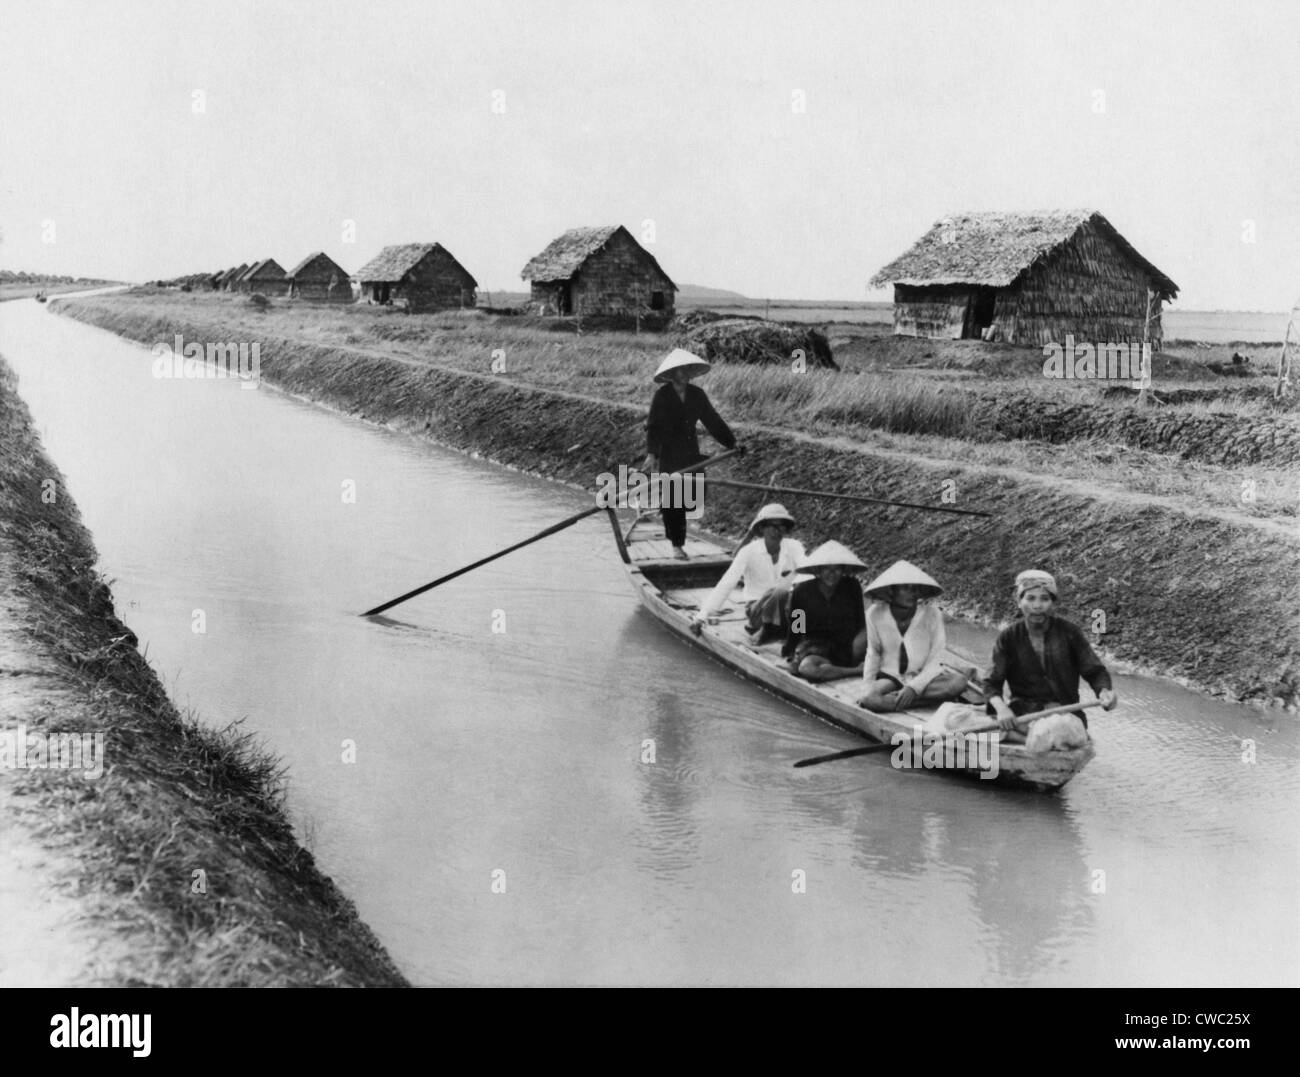 Vietnamese men in a sampan on a canal near straw dwellings that house refugees from North Vietnam. 1956. LC-DIG-ppmsca-09168 Stock Photo